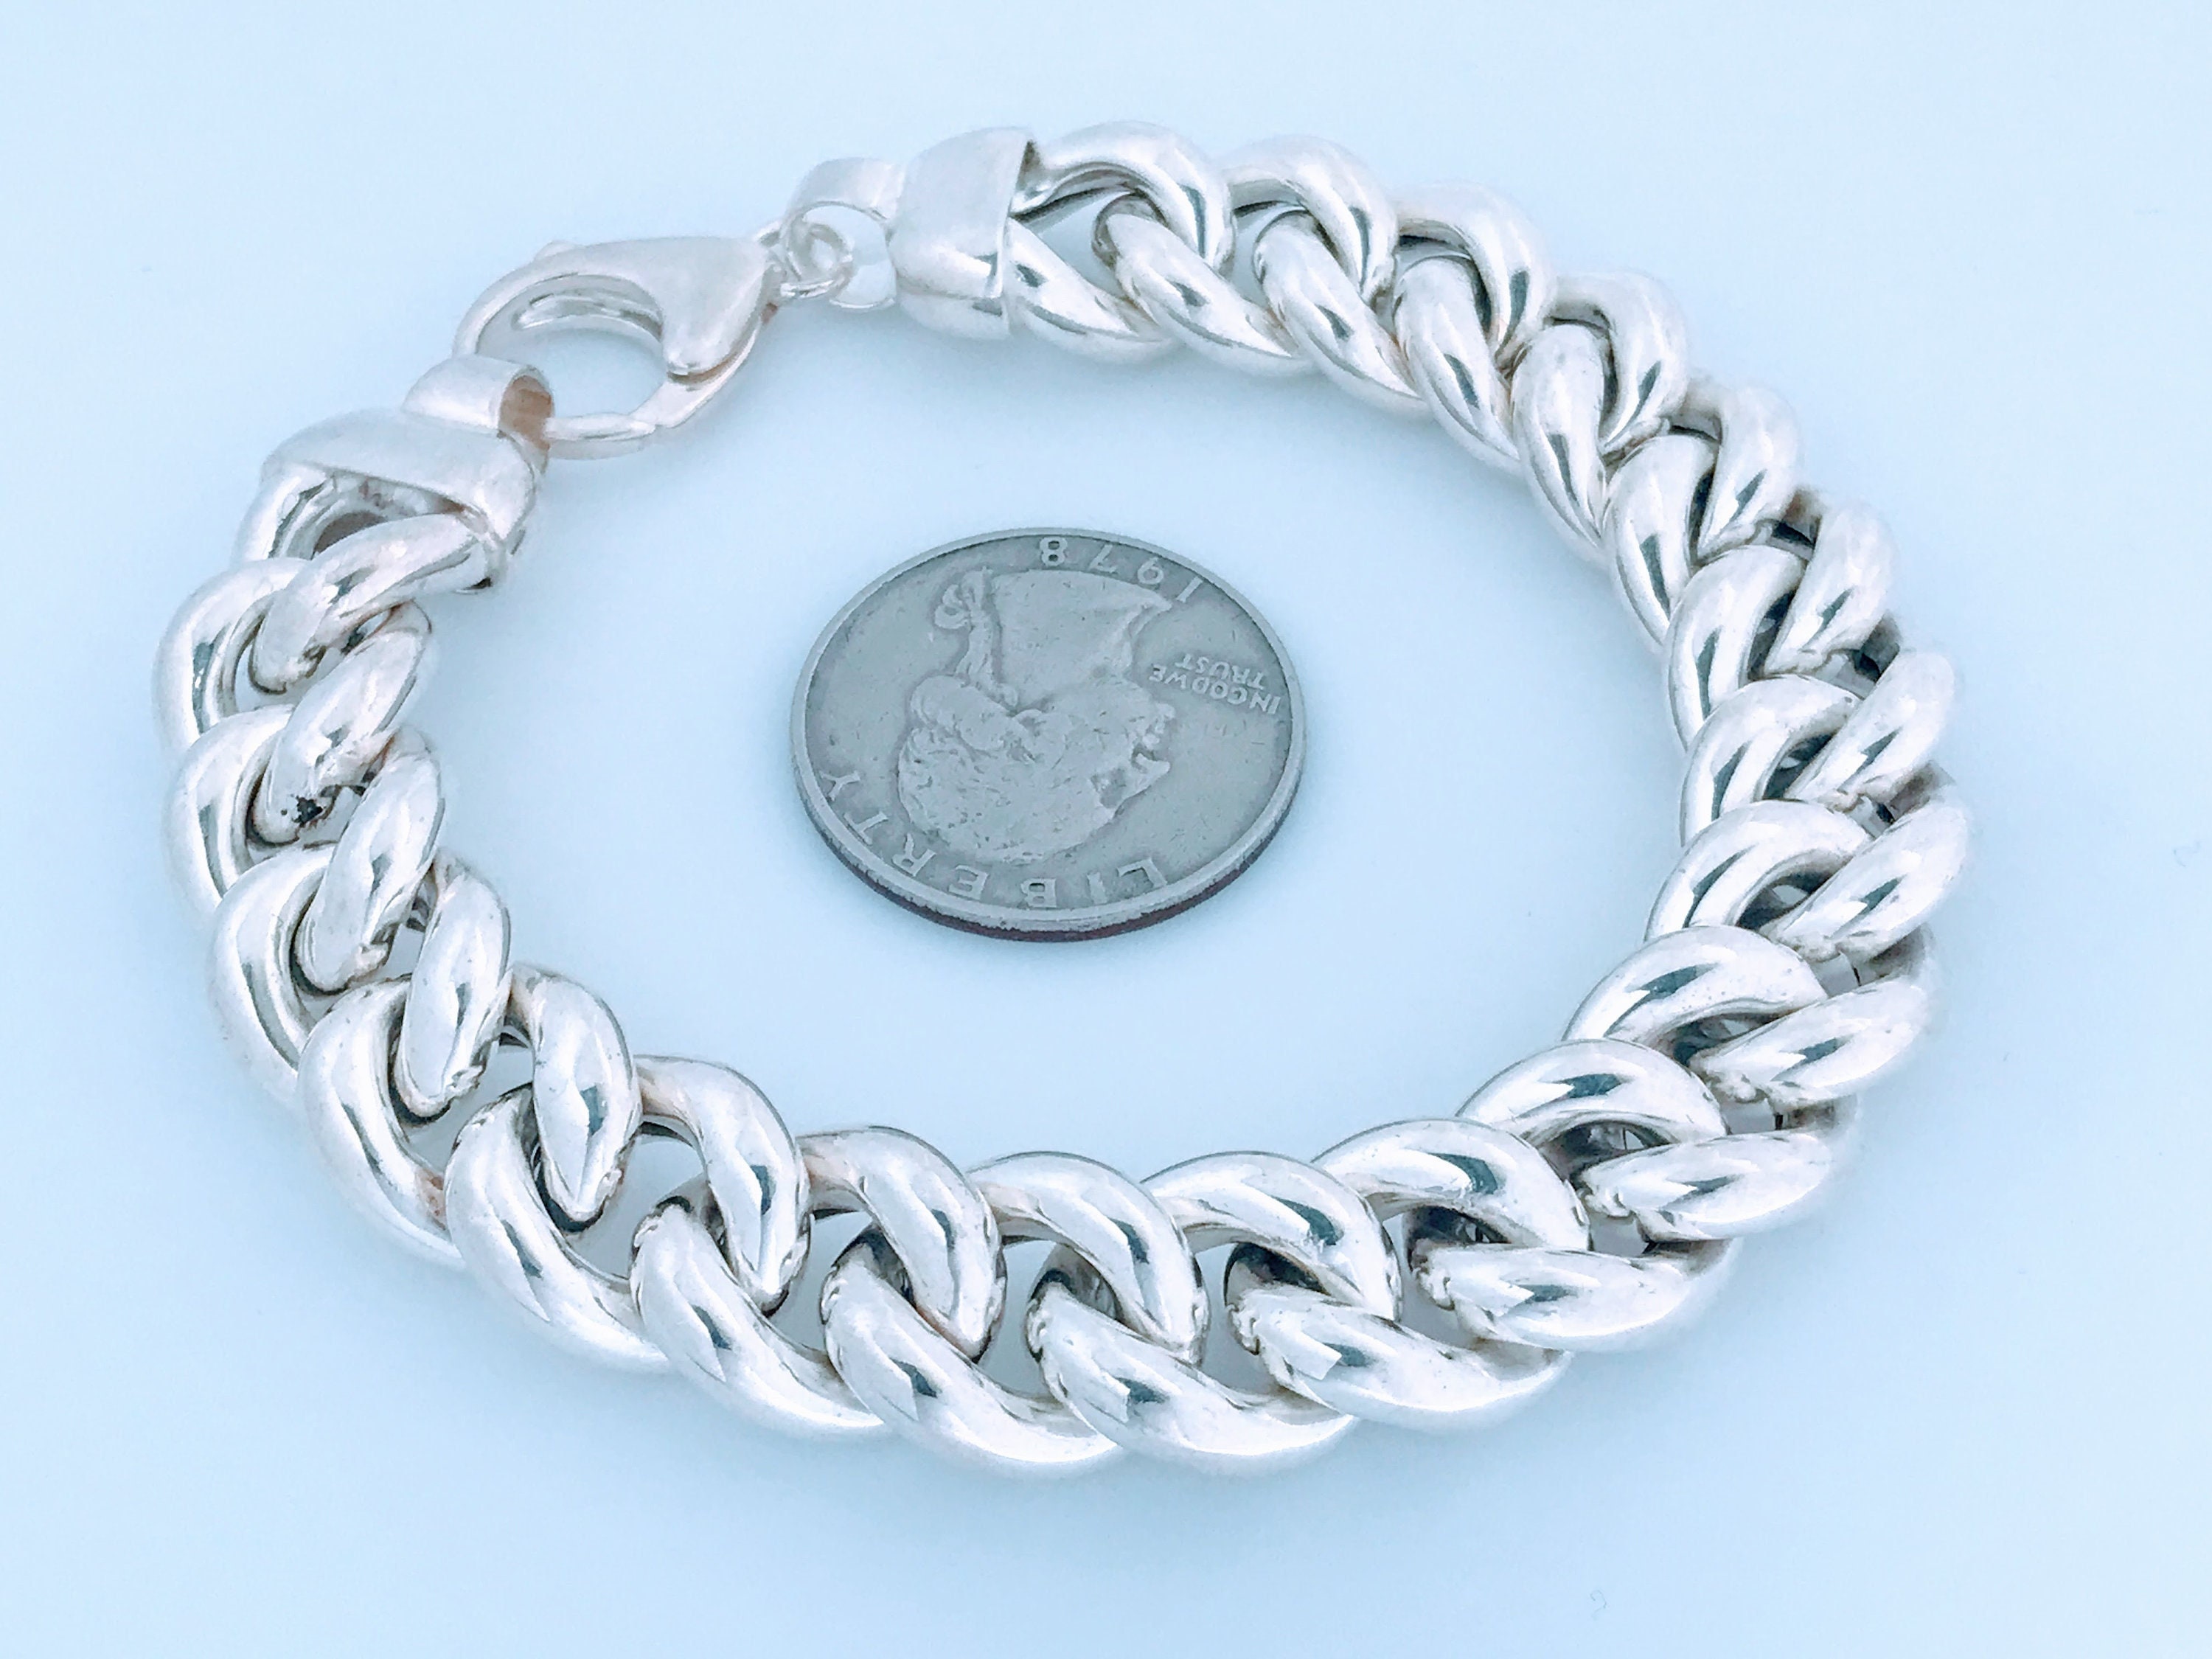 VTG Solid Sterling Silver Twisted Curb Link Toggle Bracelet, Contemporary  925 Silver Thick Wide Chain Link Charm Bracelet, Modern Cuban Link 